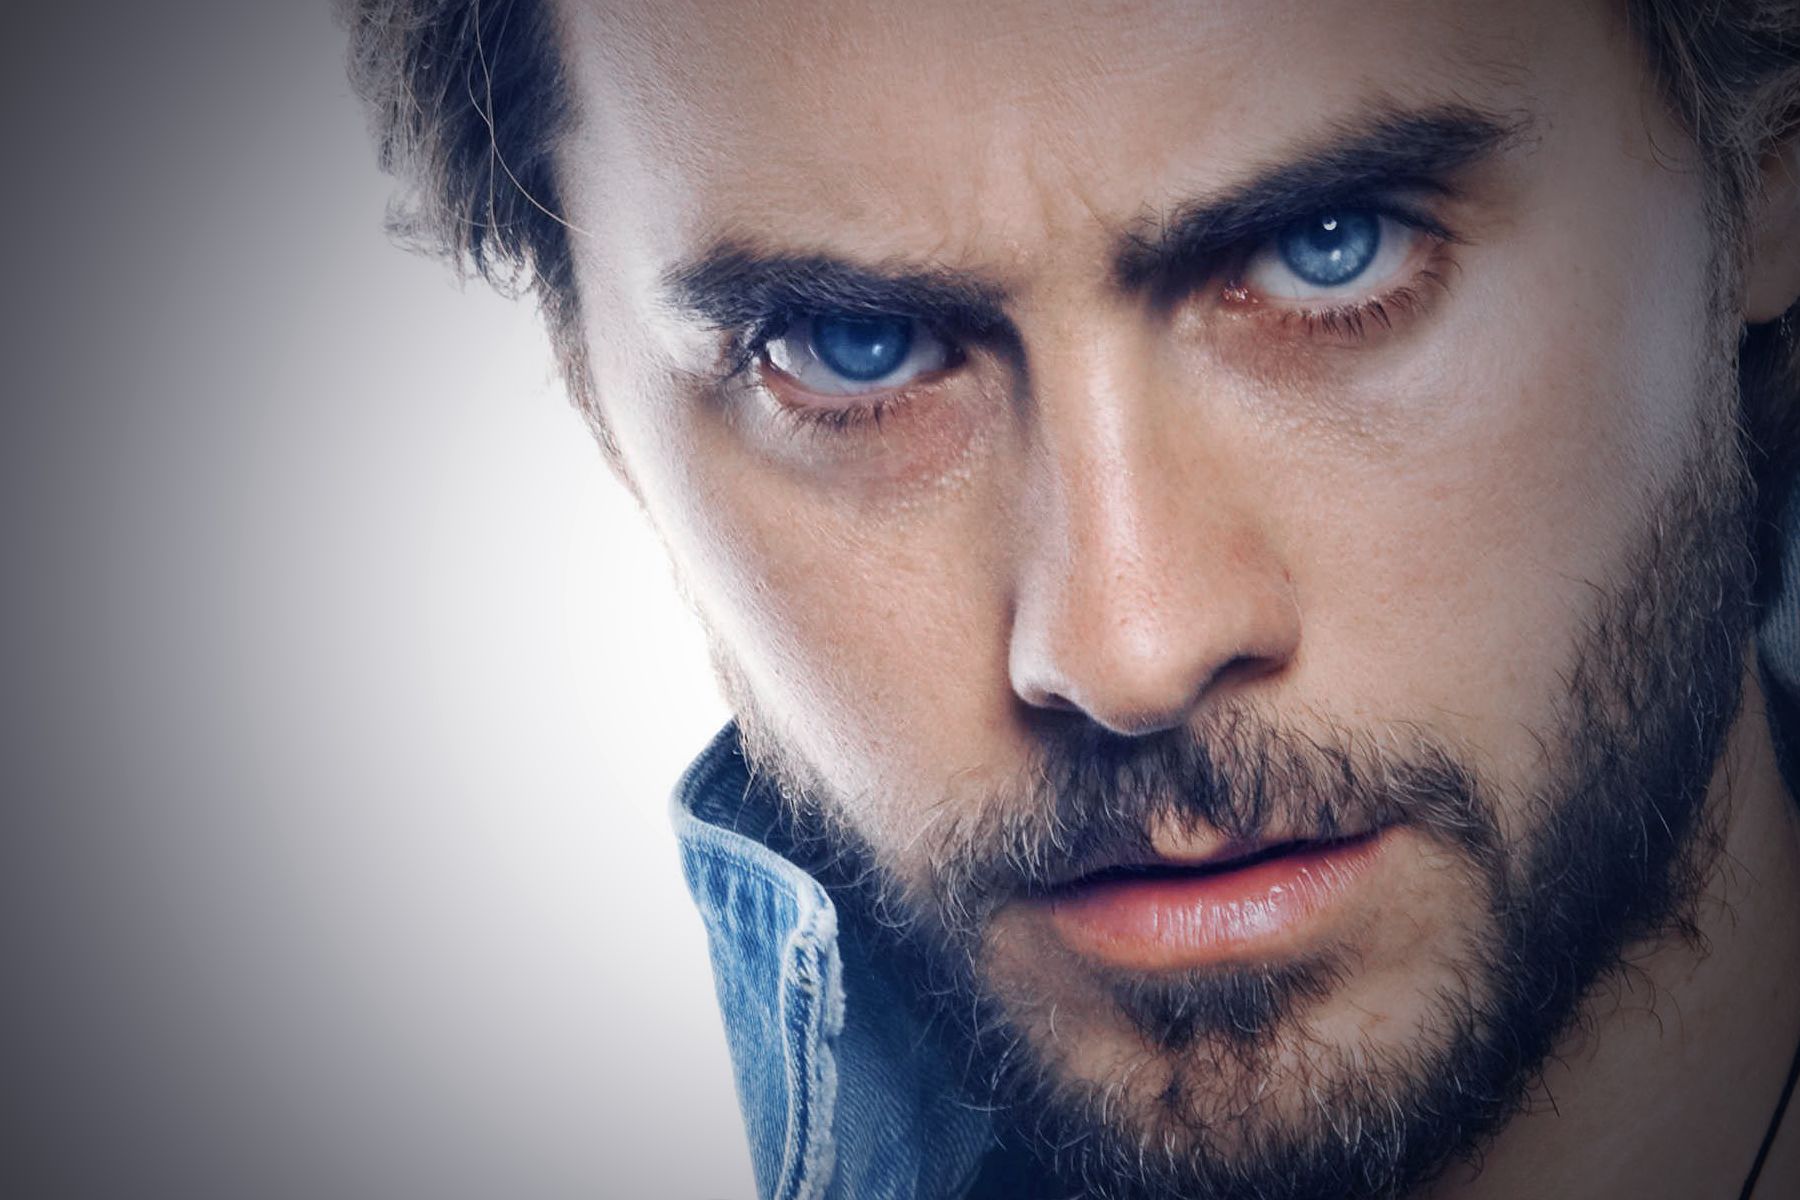 High Resolution Wallpaper | Jared Leto 1800x1200 px